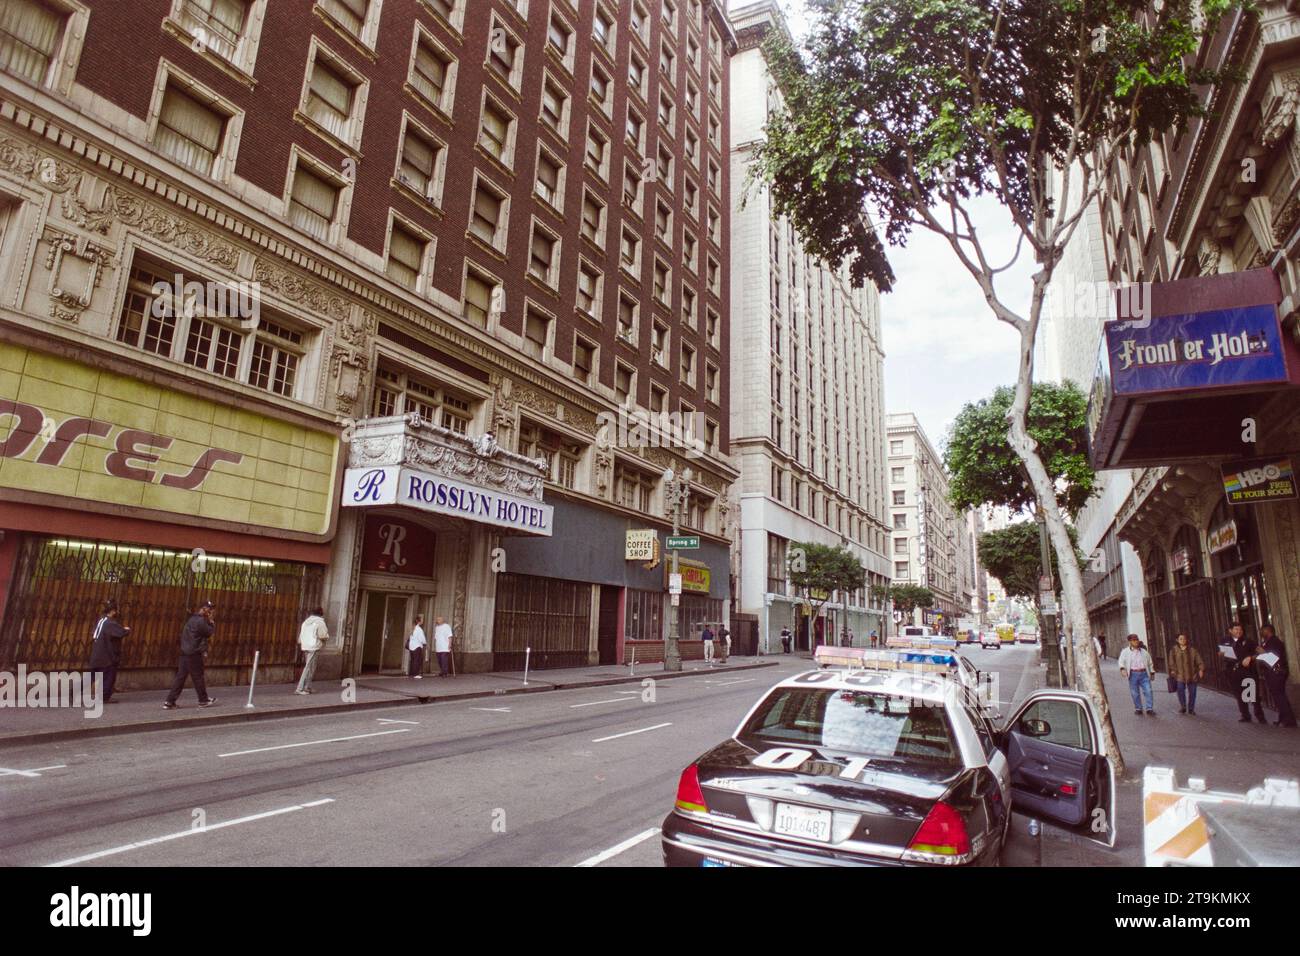 Los Angeles, California, USA - January 15, 2000:  Archival editorial view of the historic Rosslyn Hotel on gritty 5th street in downtown LA.  Shot on film. Stock Photo